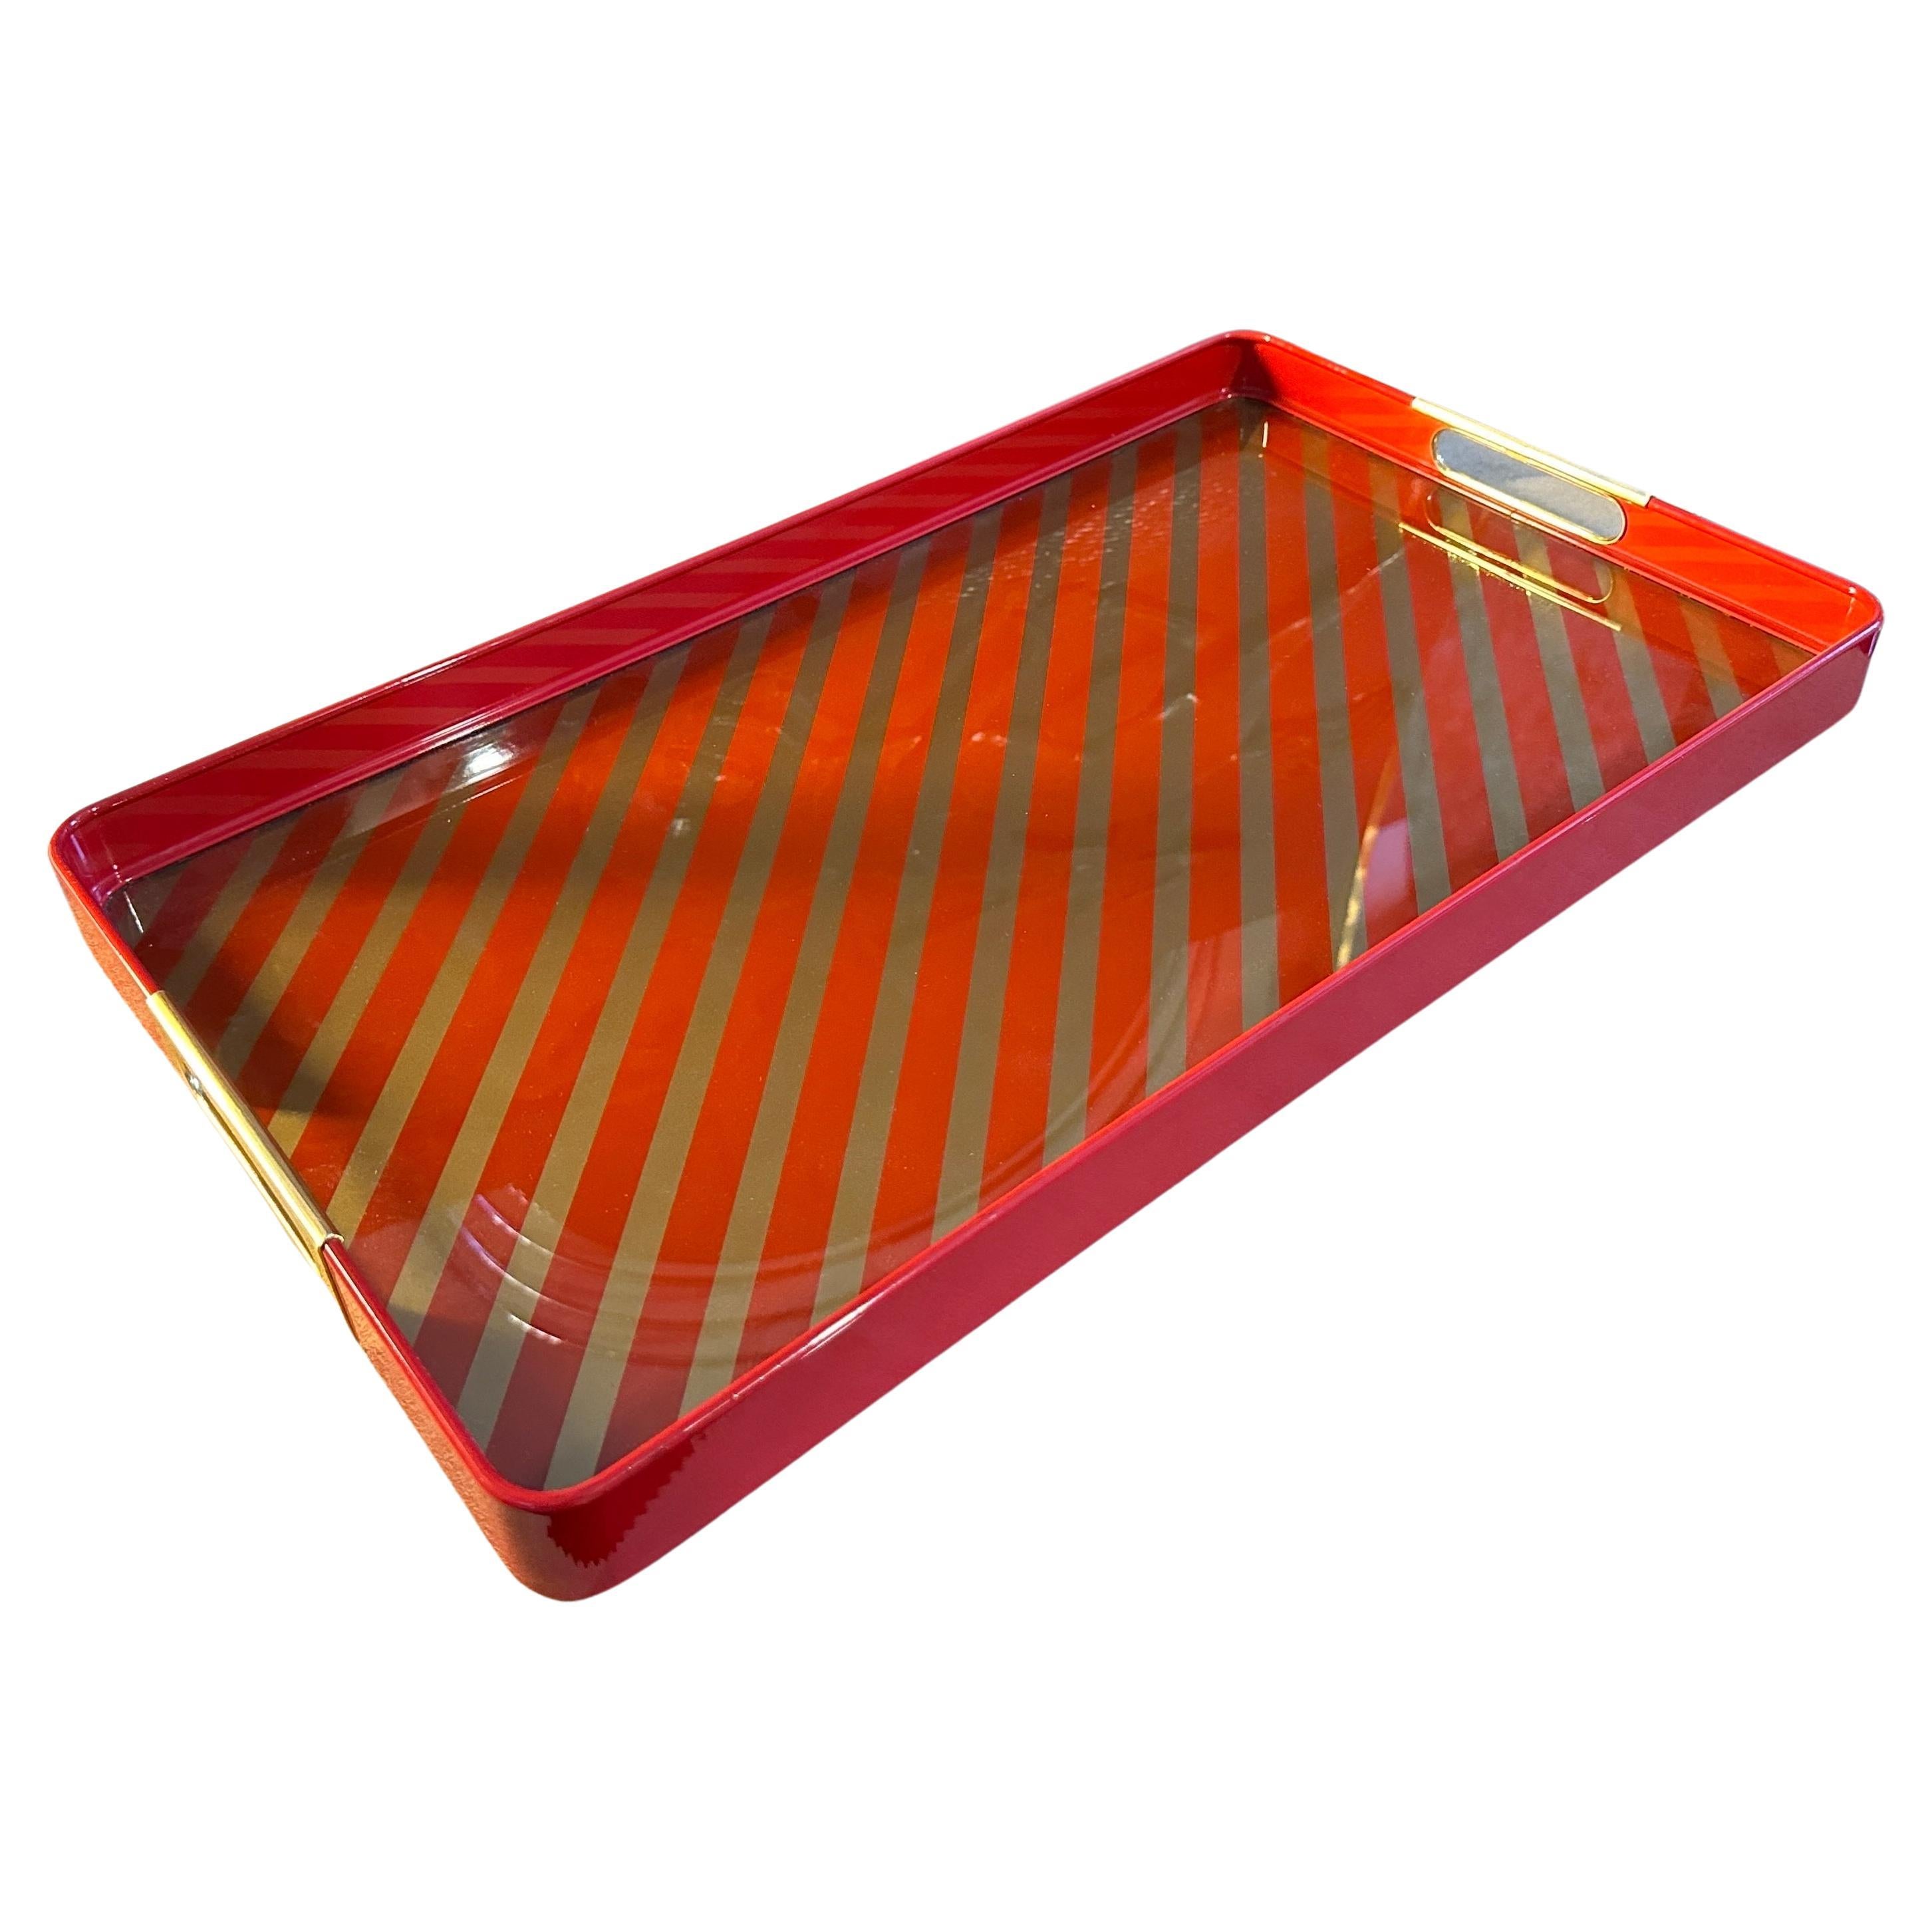 1960s Mid-Century Modern Red and Gold Painted Metal Rectangular Italian Tray For Sale